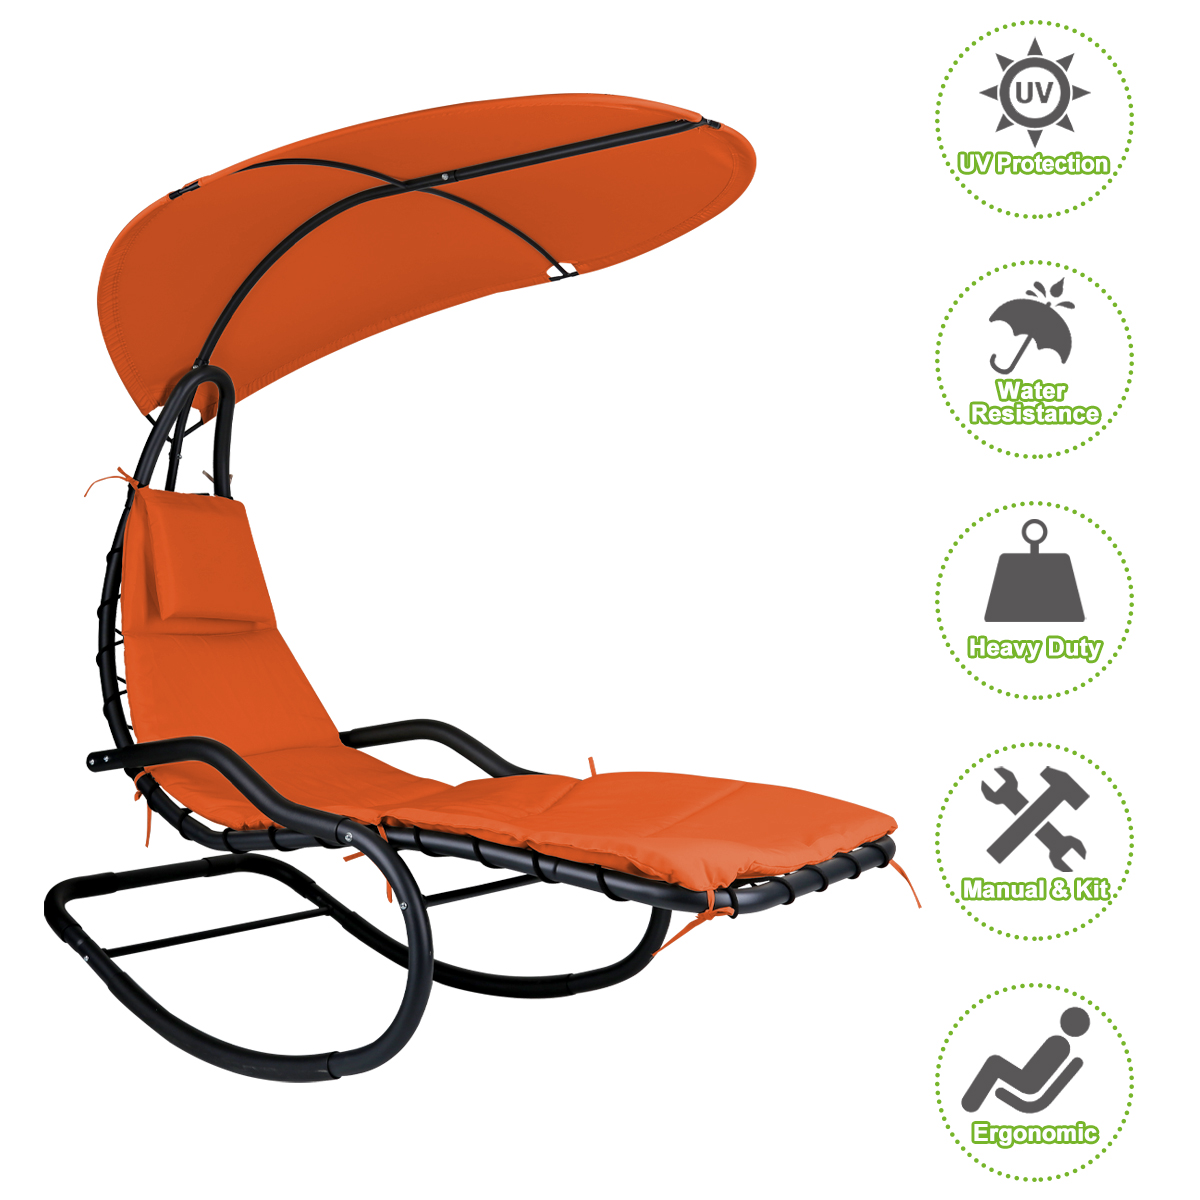 Rocking Hanging Lounge Chair - Curved Chaise Rocking Lounge Chair Swing For Backyard Patio w/ Built-in Pillow Removable Canopy with stand {Orange} - image 5 of 8